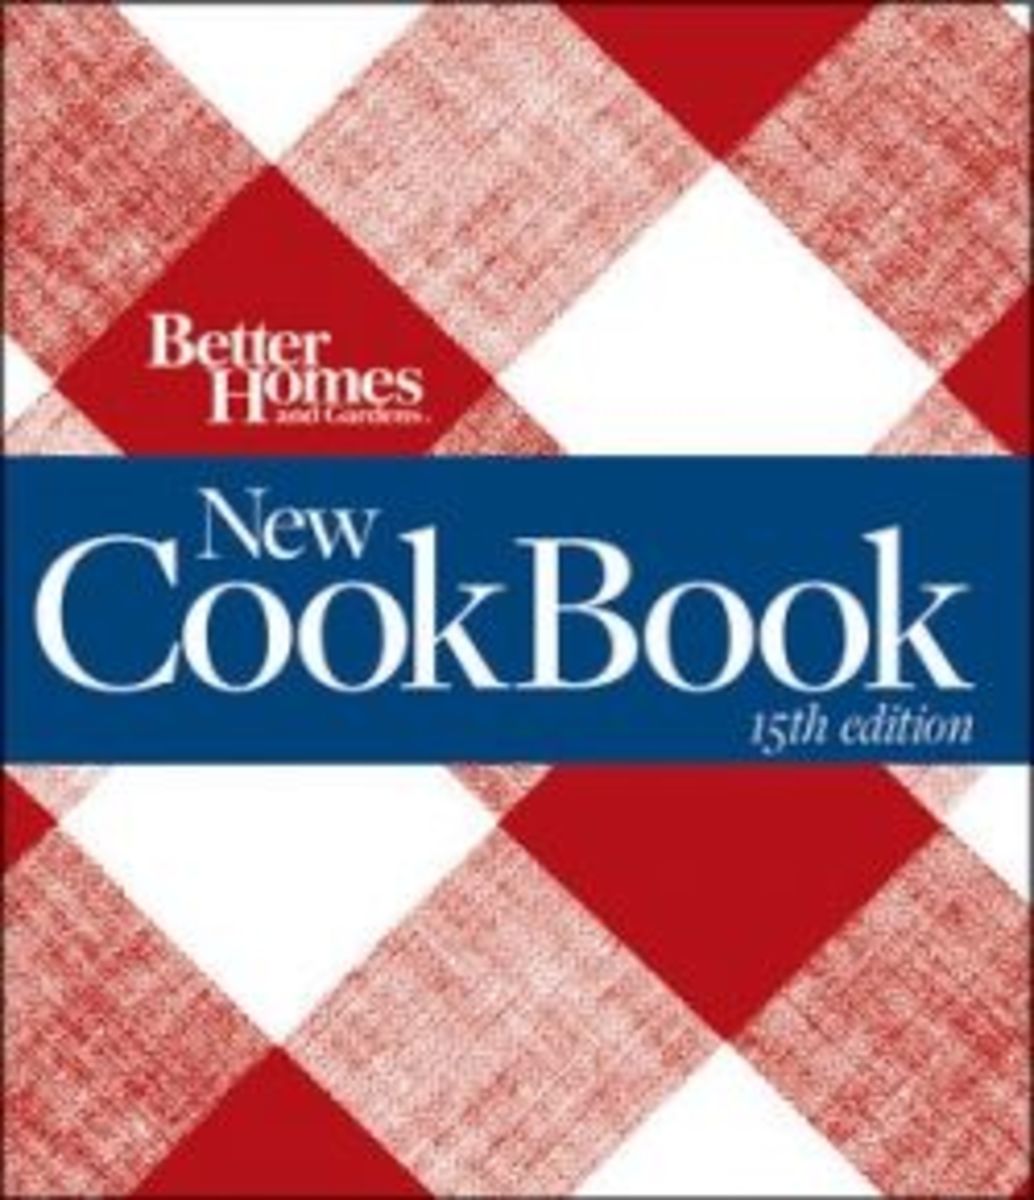 Better Homes and Gardens New Cookbook 15th Edition | HubPages